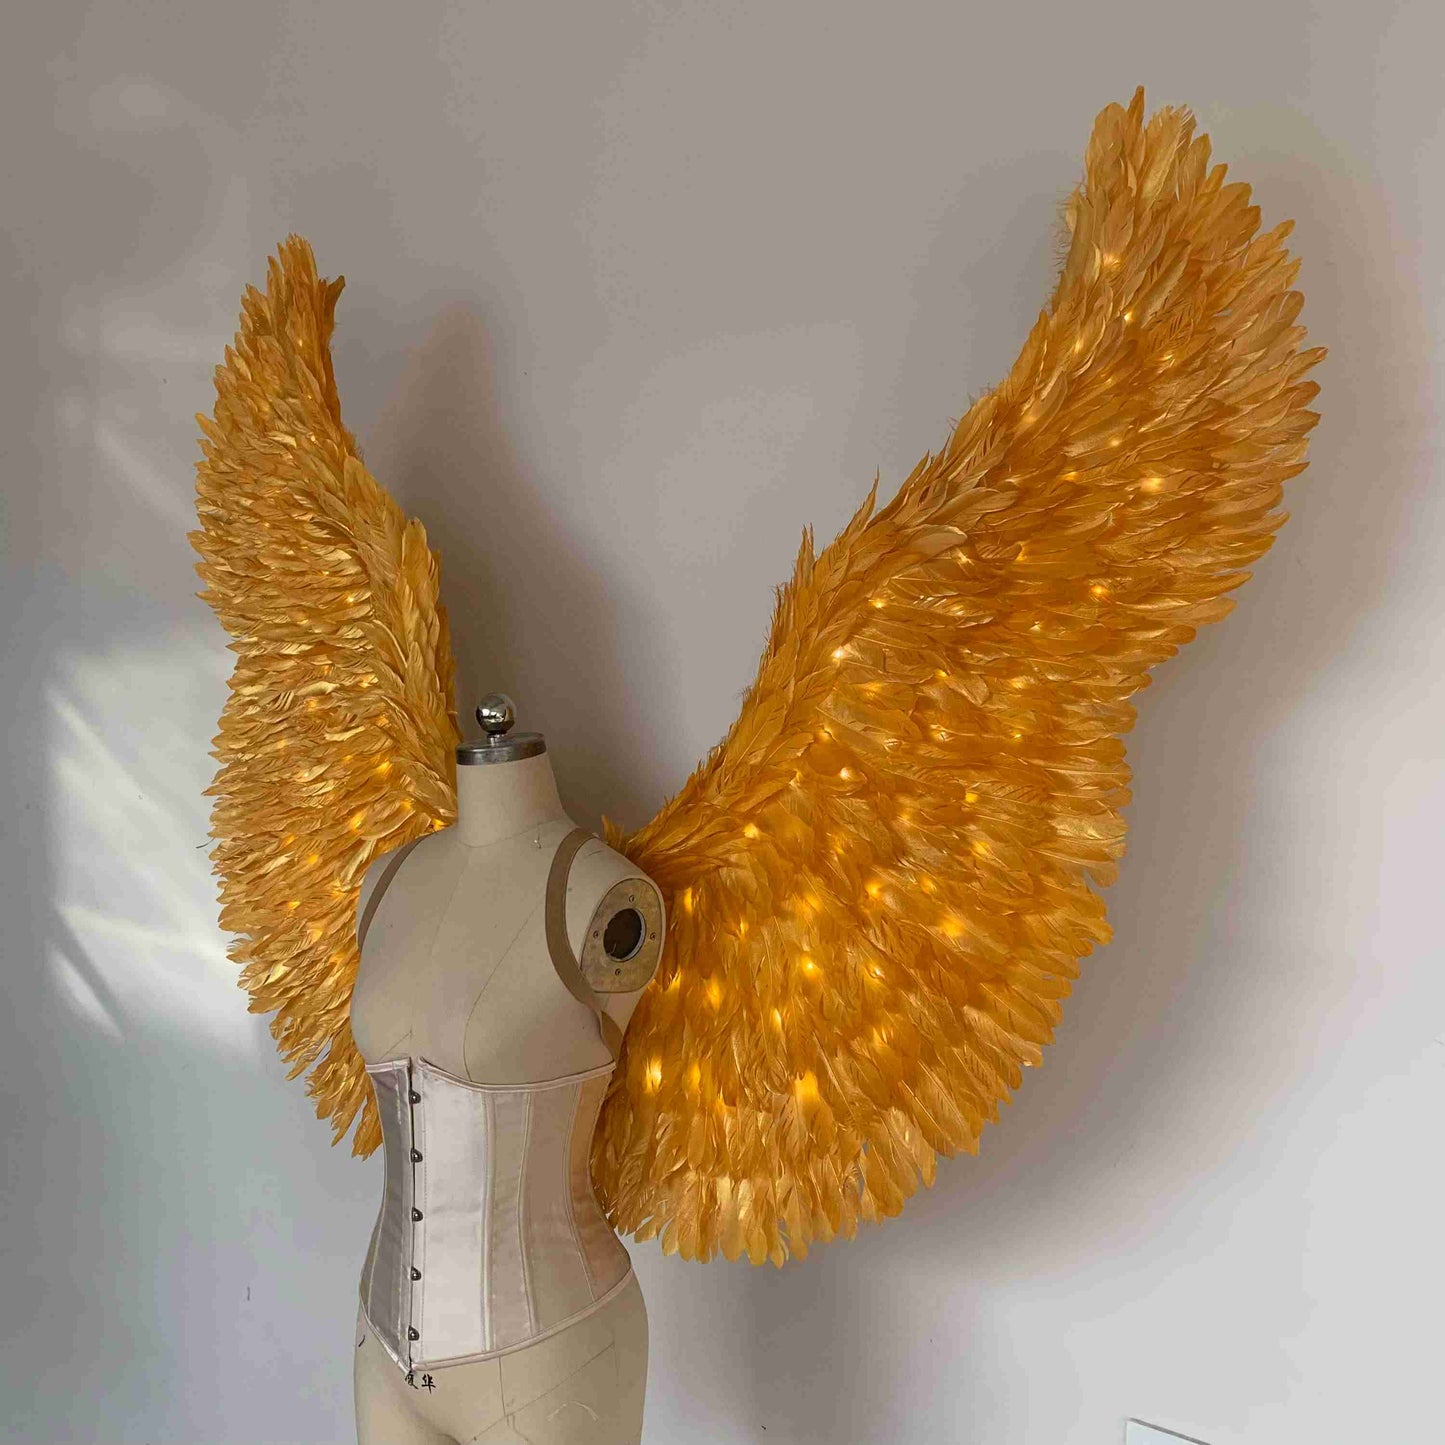 Our gold color angel wings from the left side. Made from goose feathers with LED lights inside. Wings for angel costume. Suitable for photoshoots.